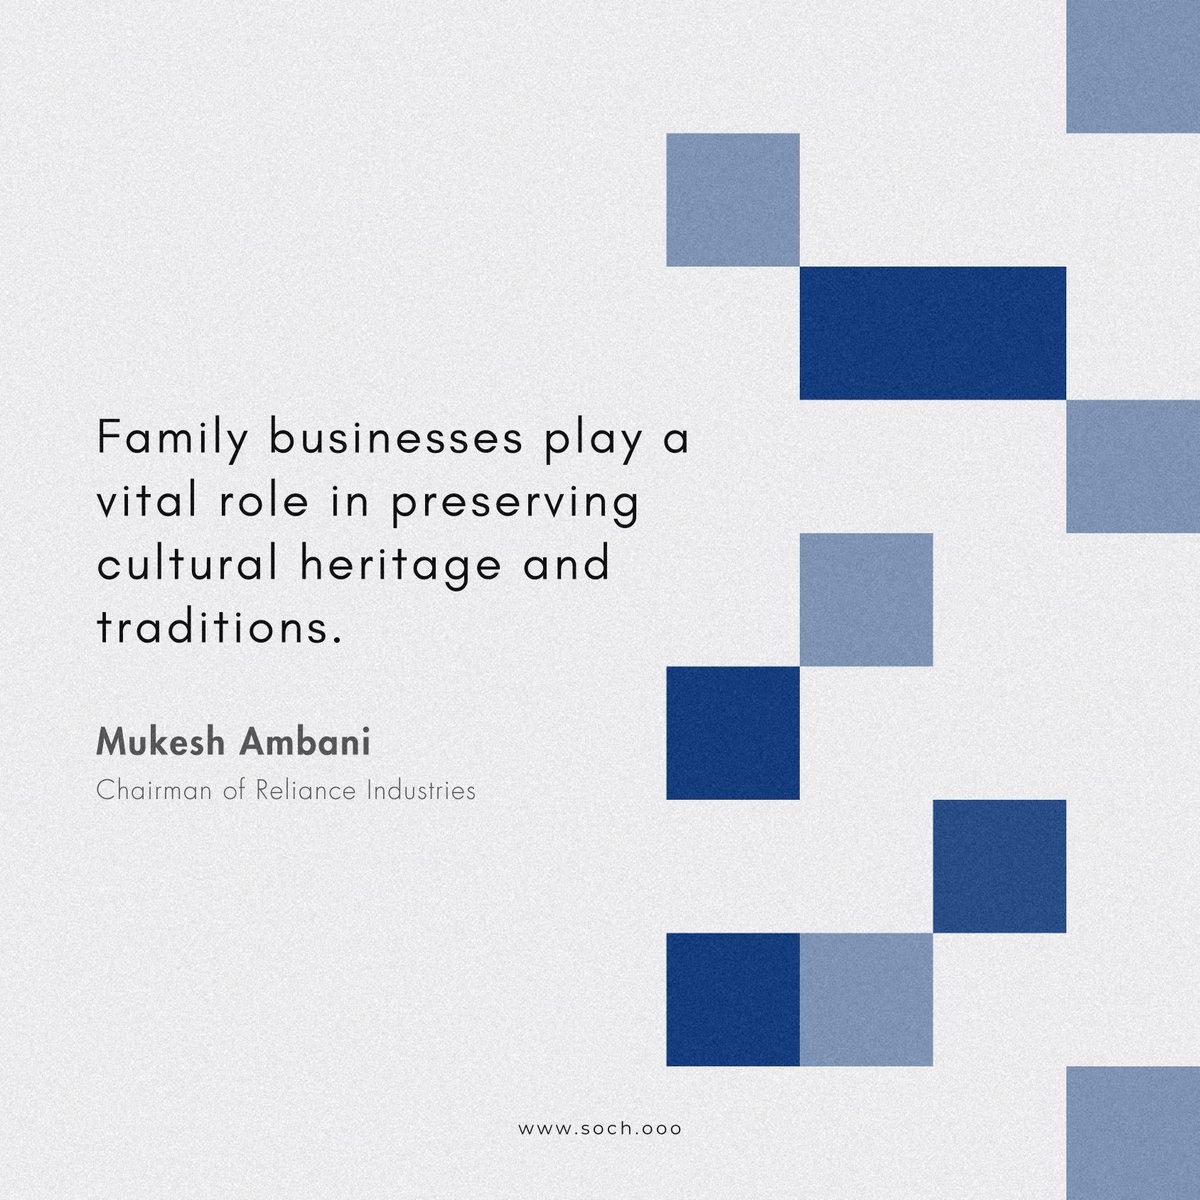 How is your family business helping our nation preserve its culture and traditions? 

#familyBusiness #preservingCulture #preservingTraditions #culturalHeritage #supportLocal #familyLegacy #communityFirst #localBusiness #cultureAndTradition